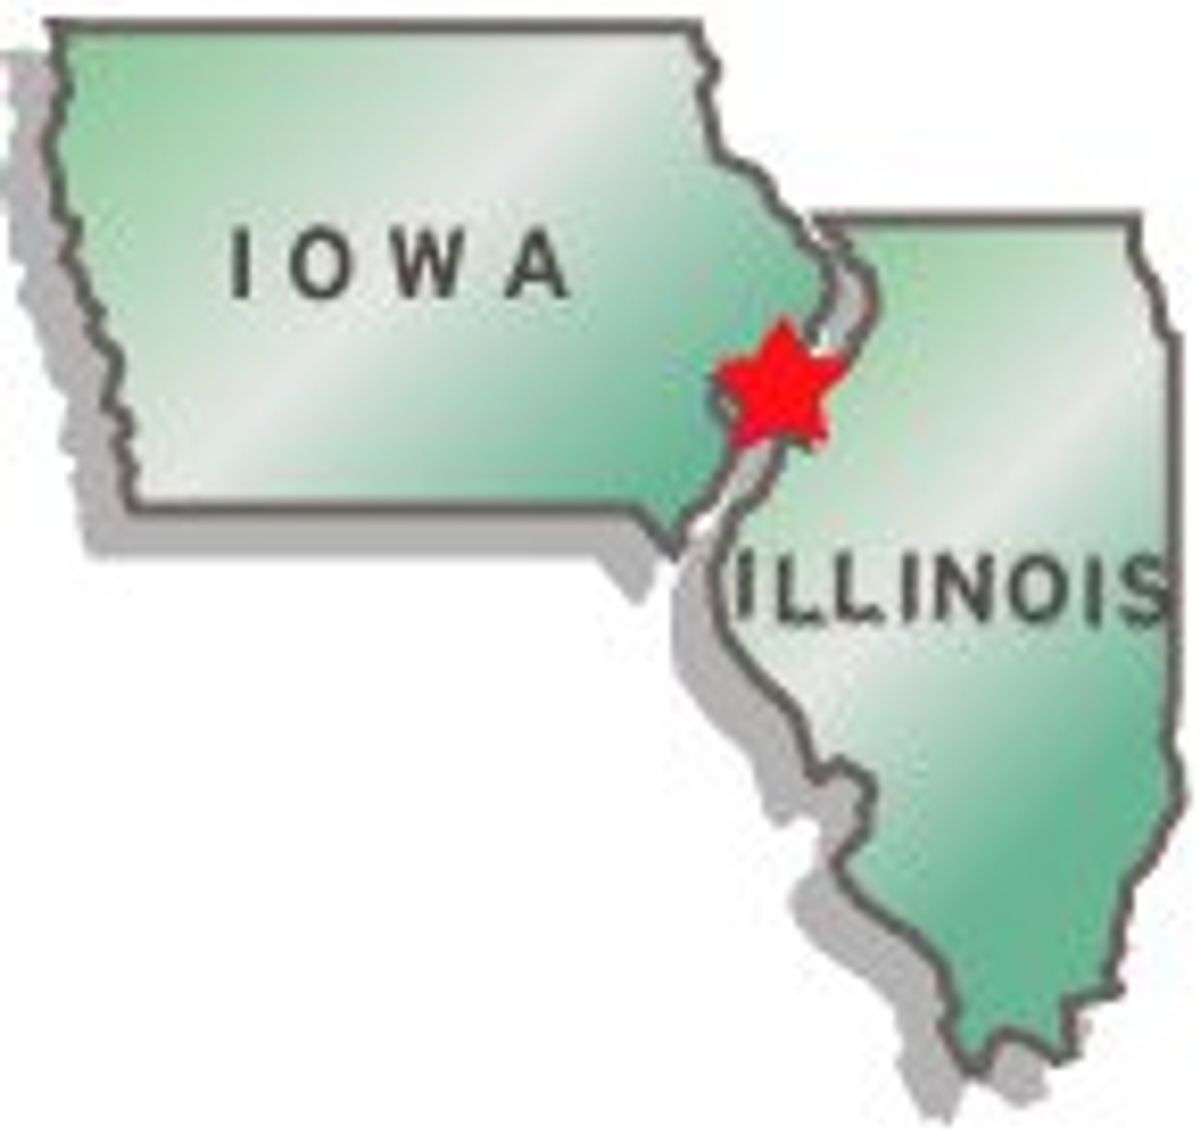 4 Differences From Iowa To Illinois